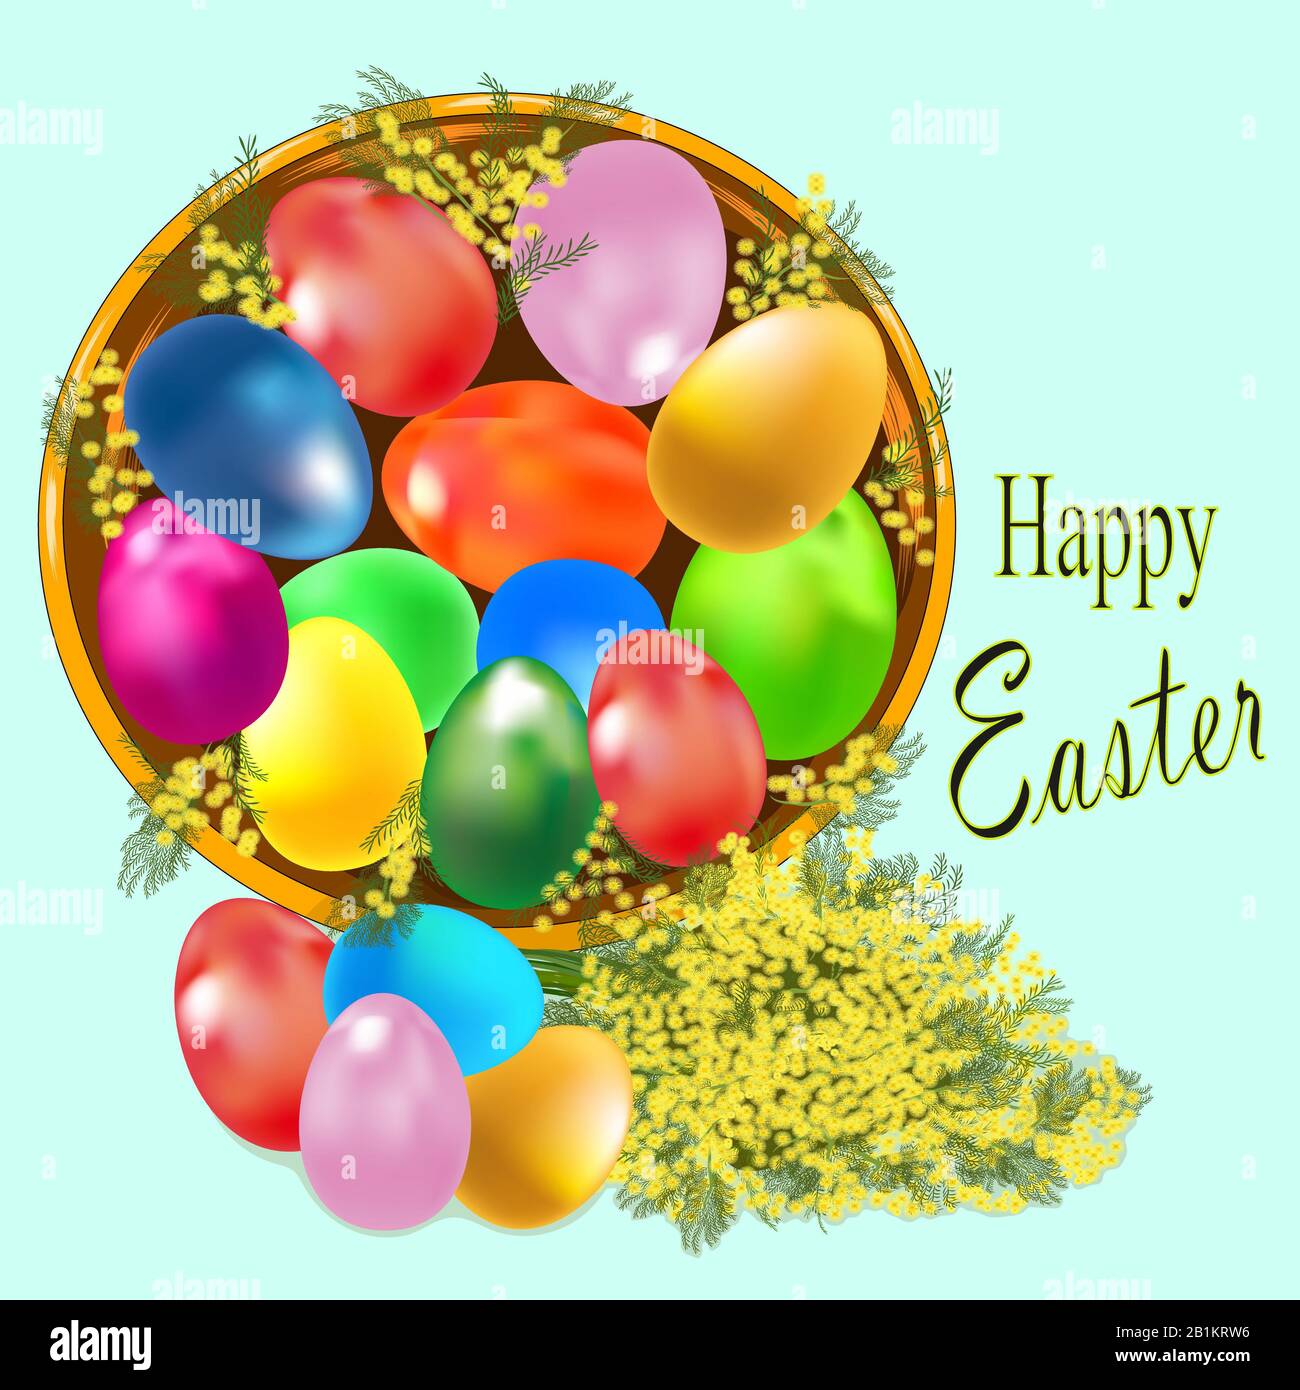 Easter egg. Beautiful multicolored, spring eggs in a basket .Happy Easter text. Mimosa flowers. Illustration. Stock Photo